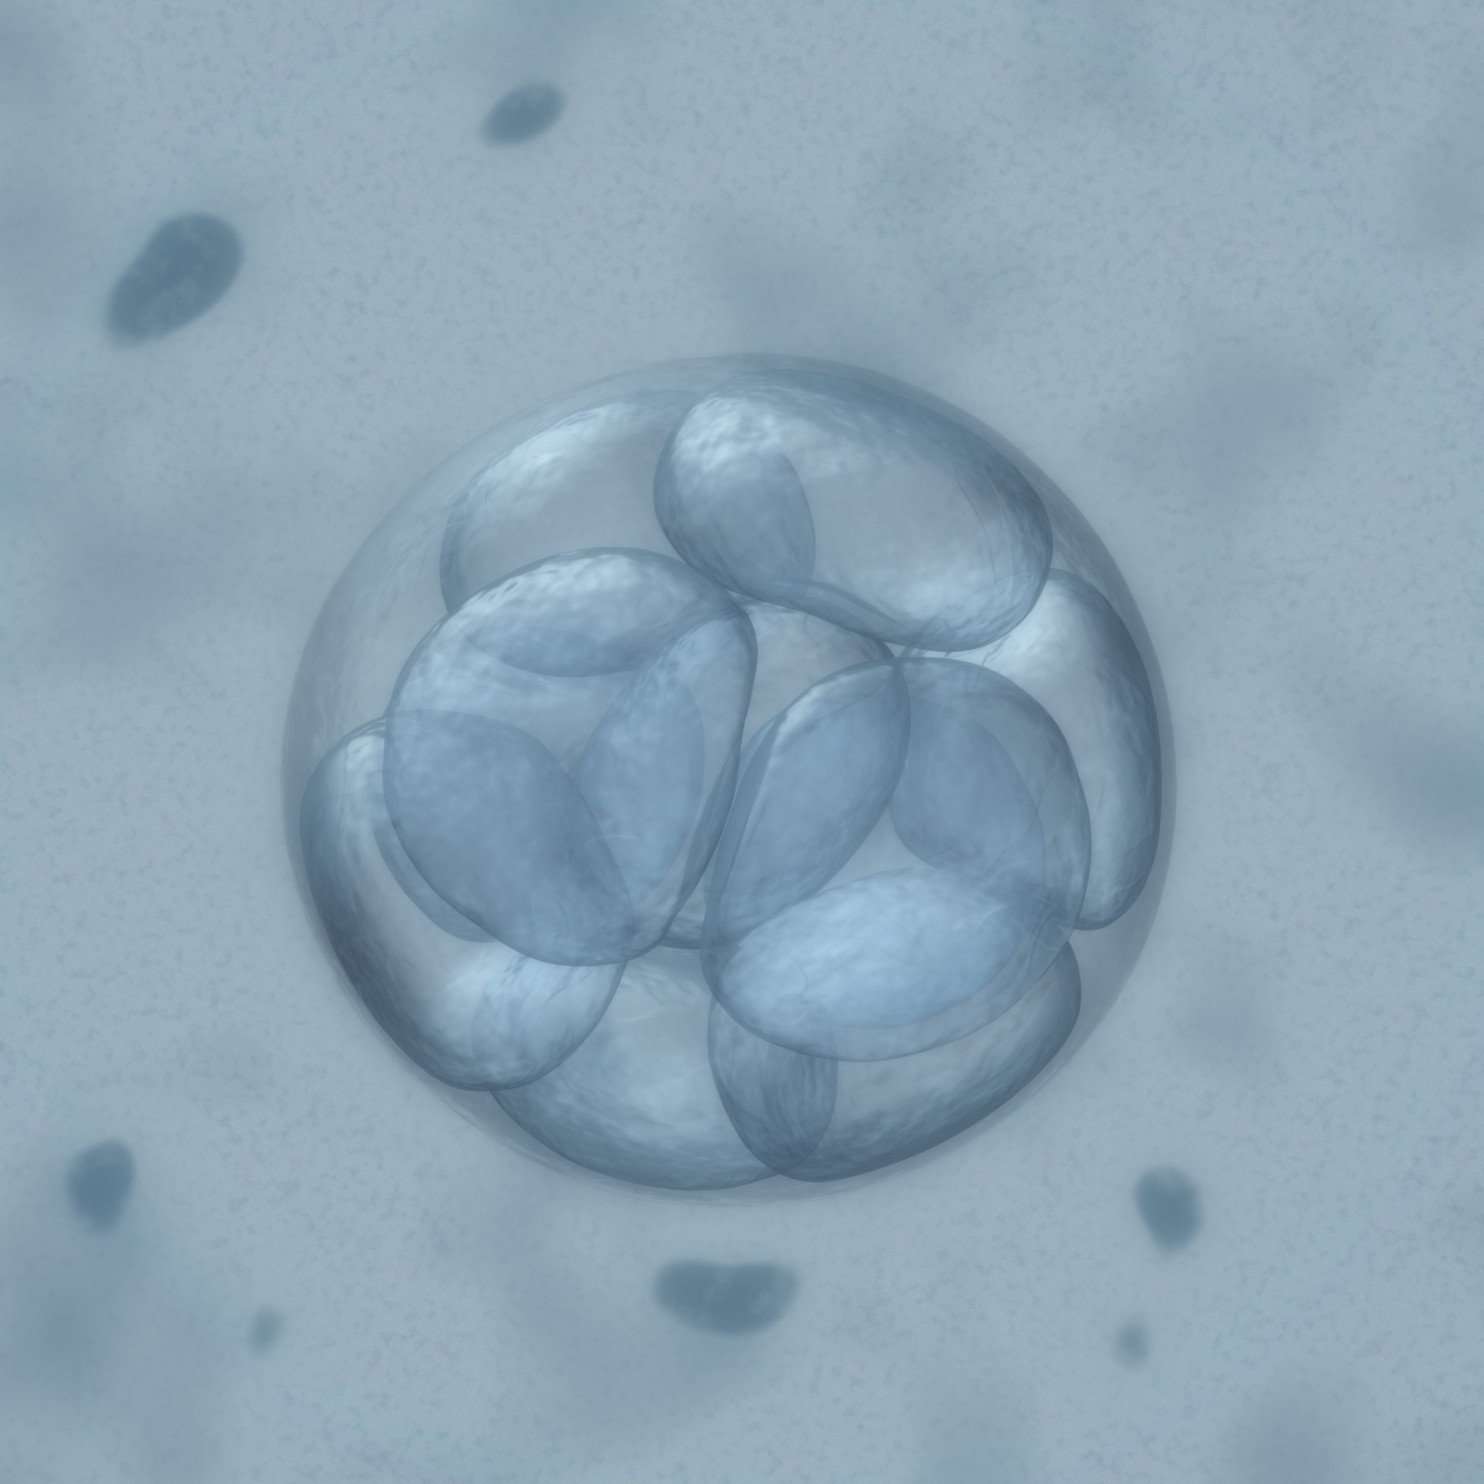 image for First human embryo editing experiment in U.S. ‘corrects’ gene for heart condition